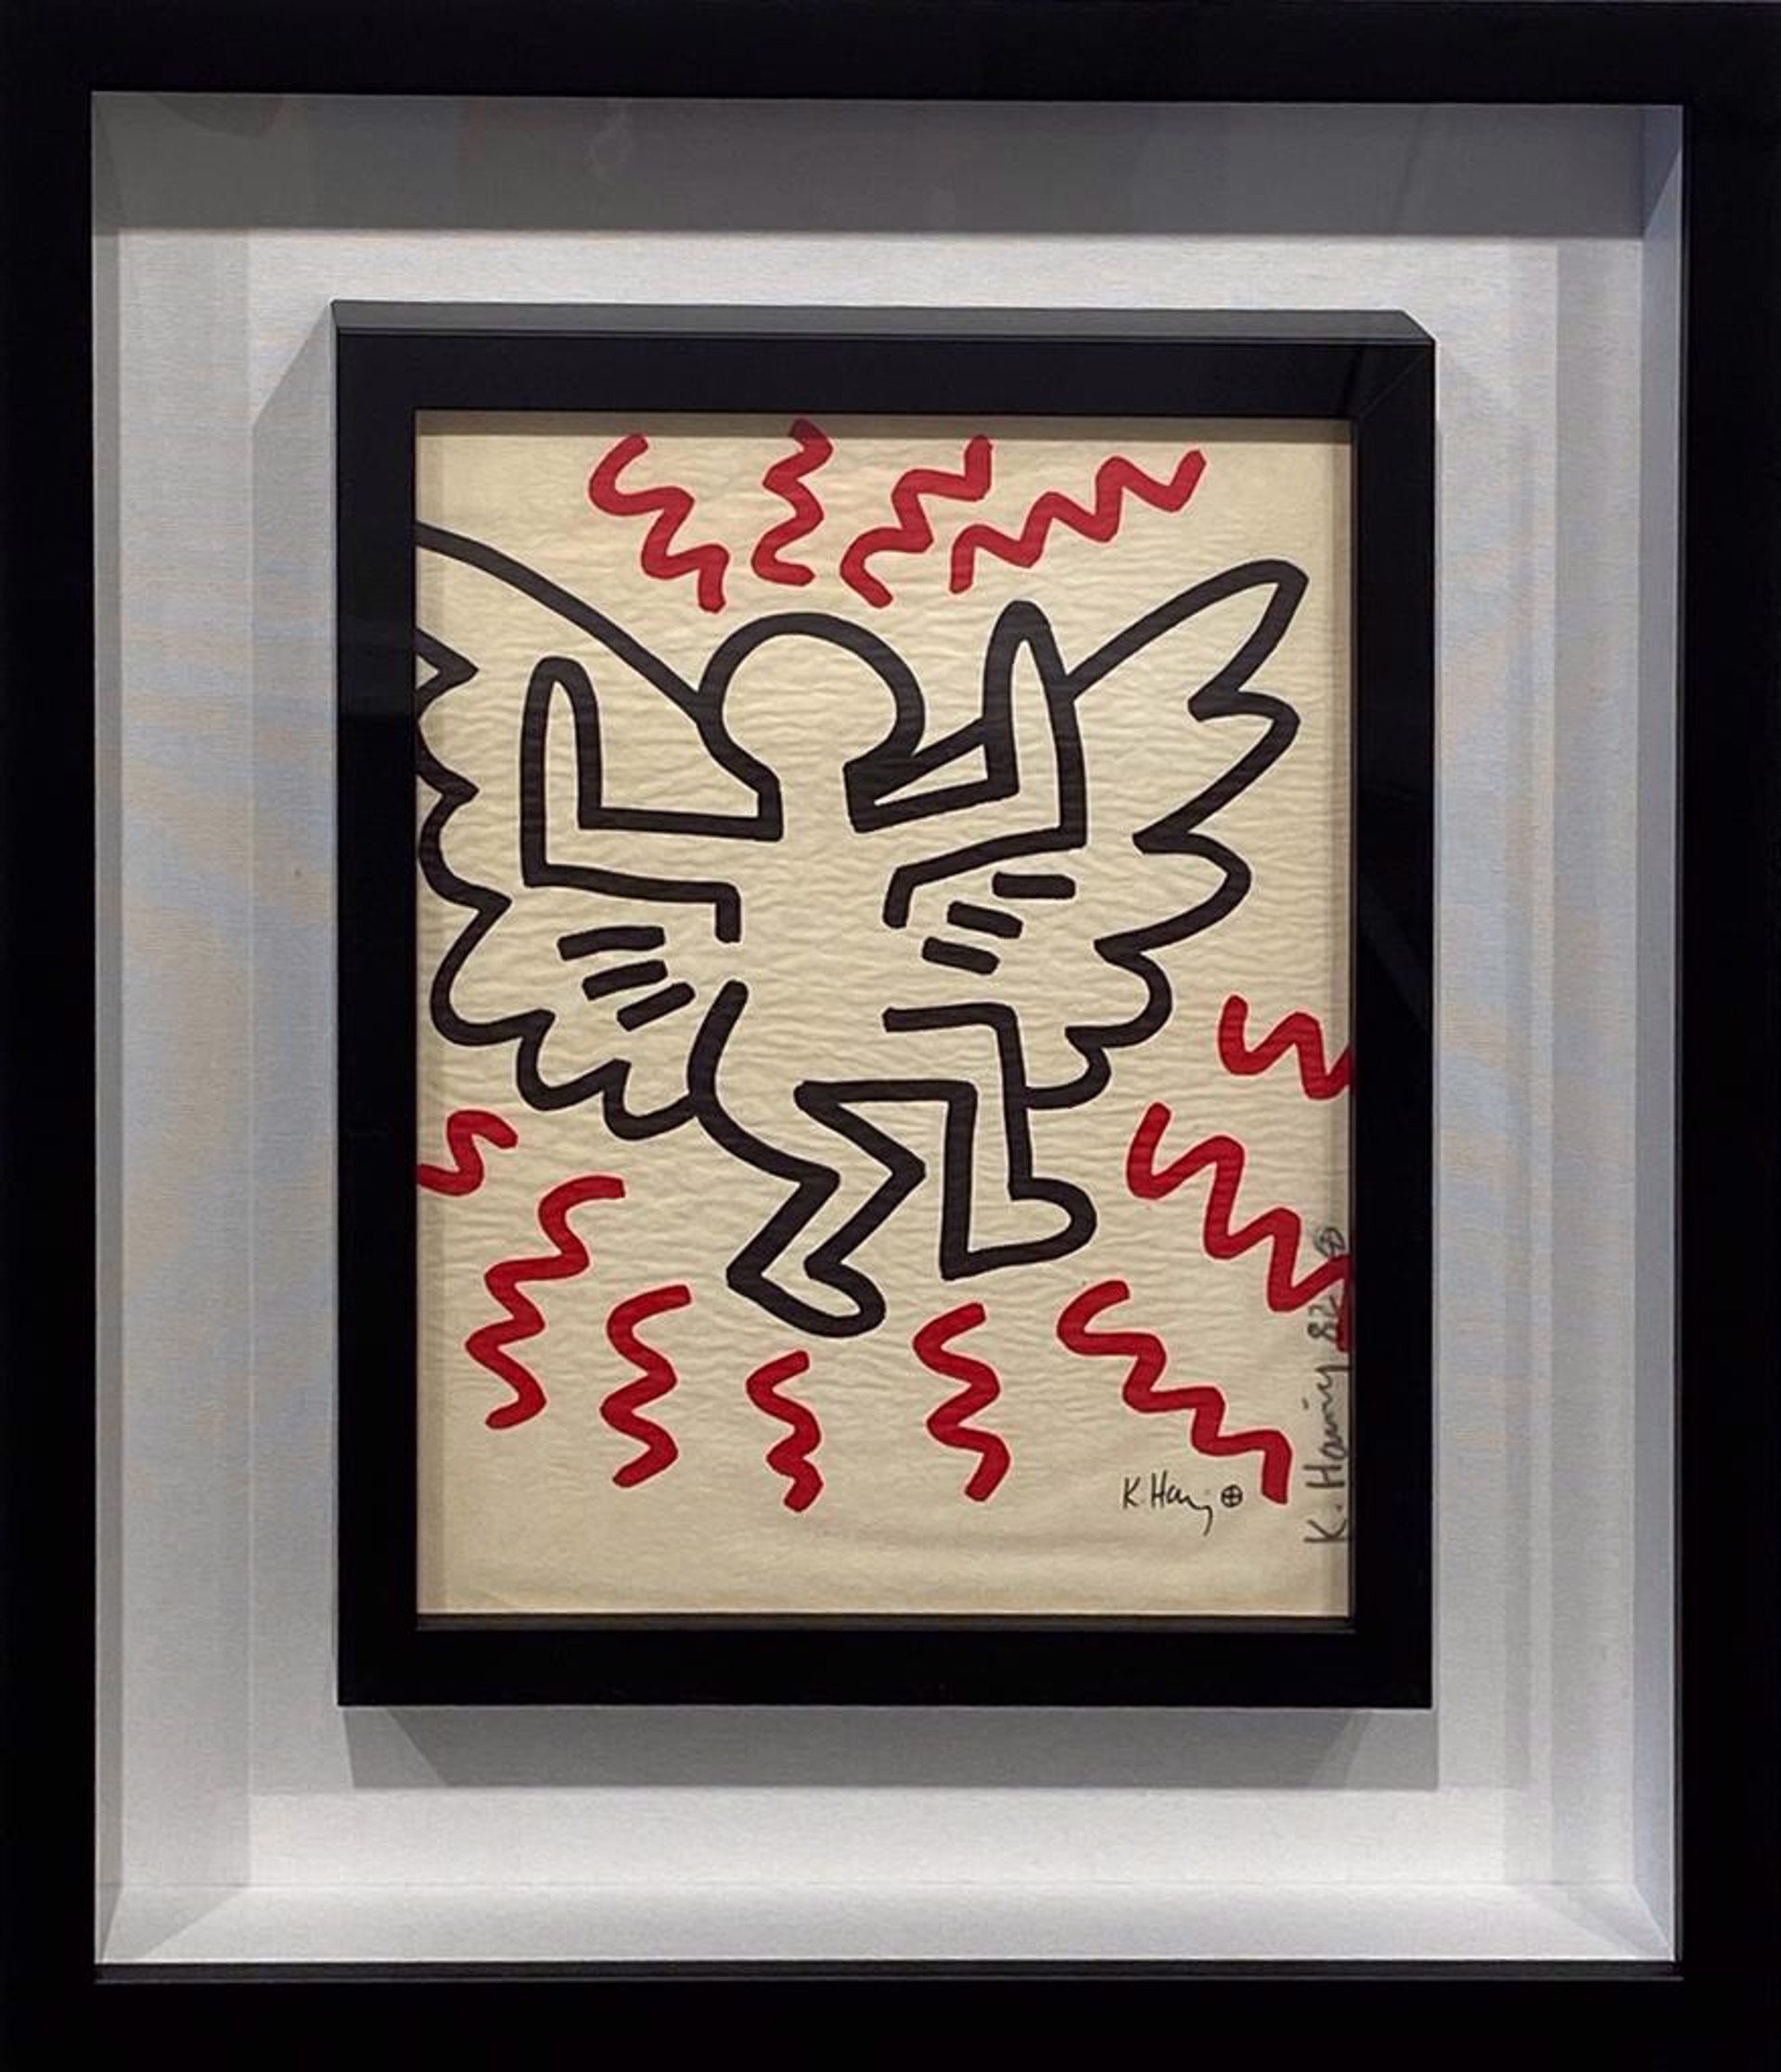 Bayer Suite #3 by Keith Haring